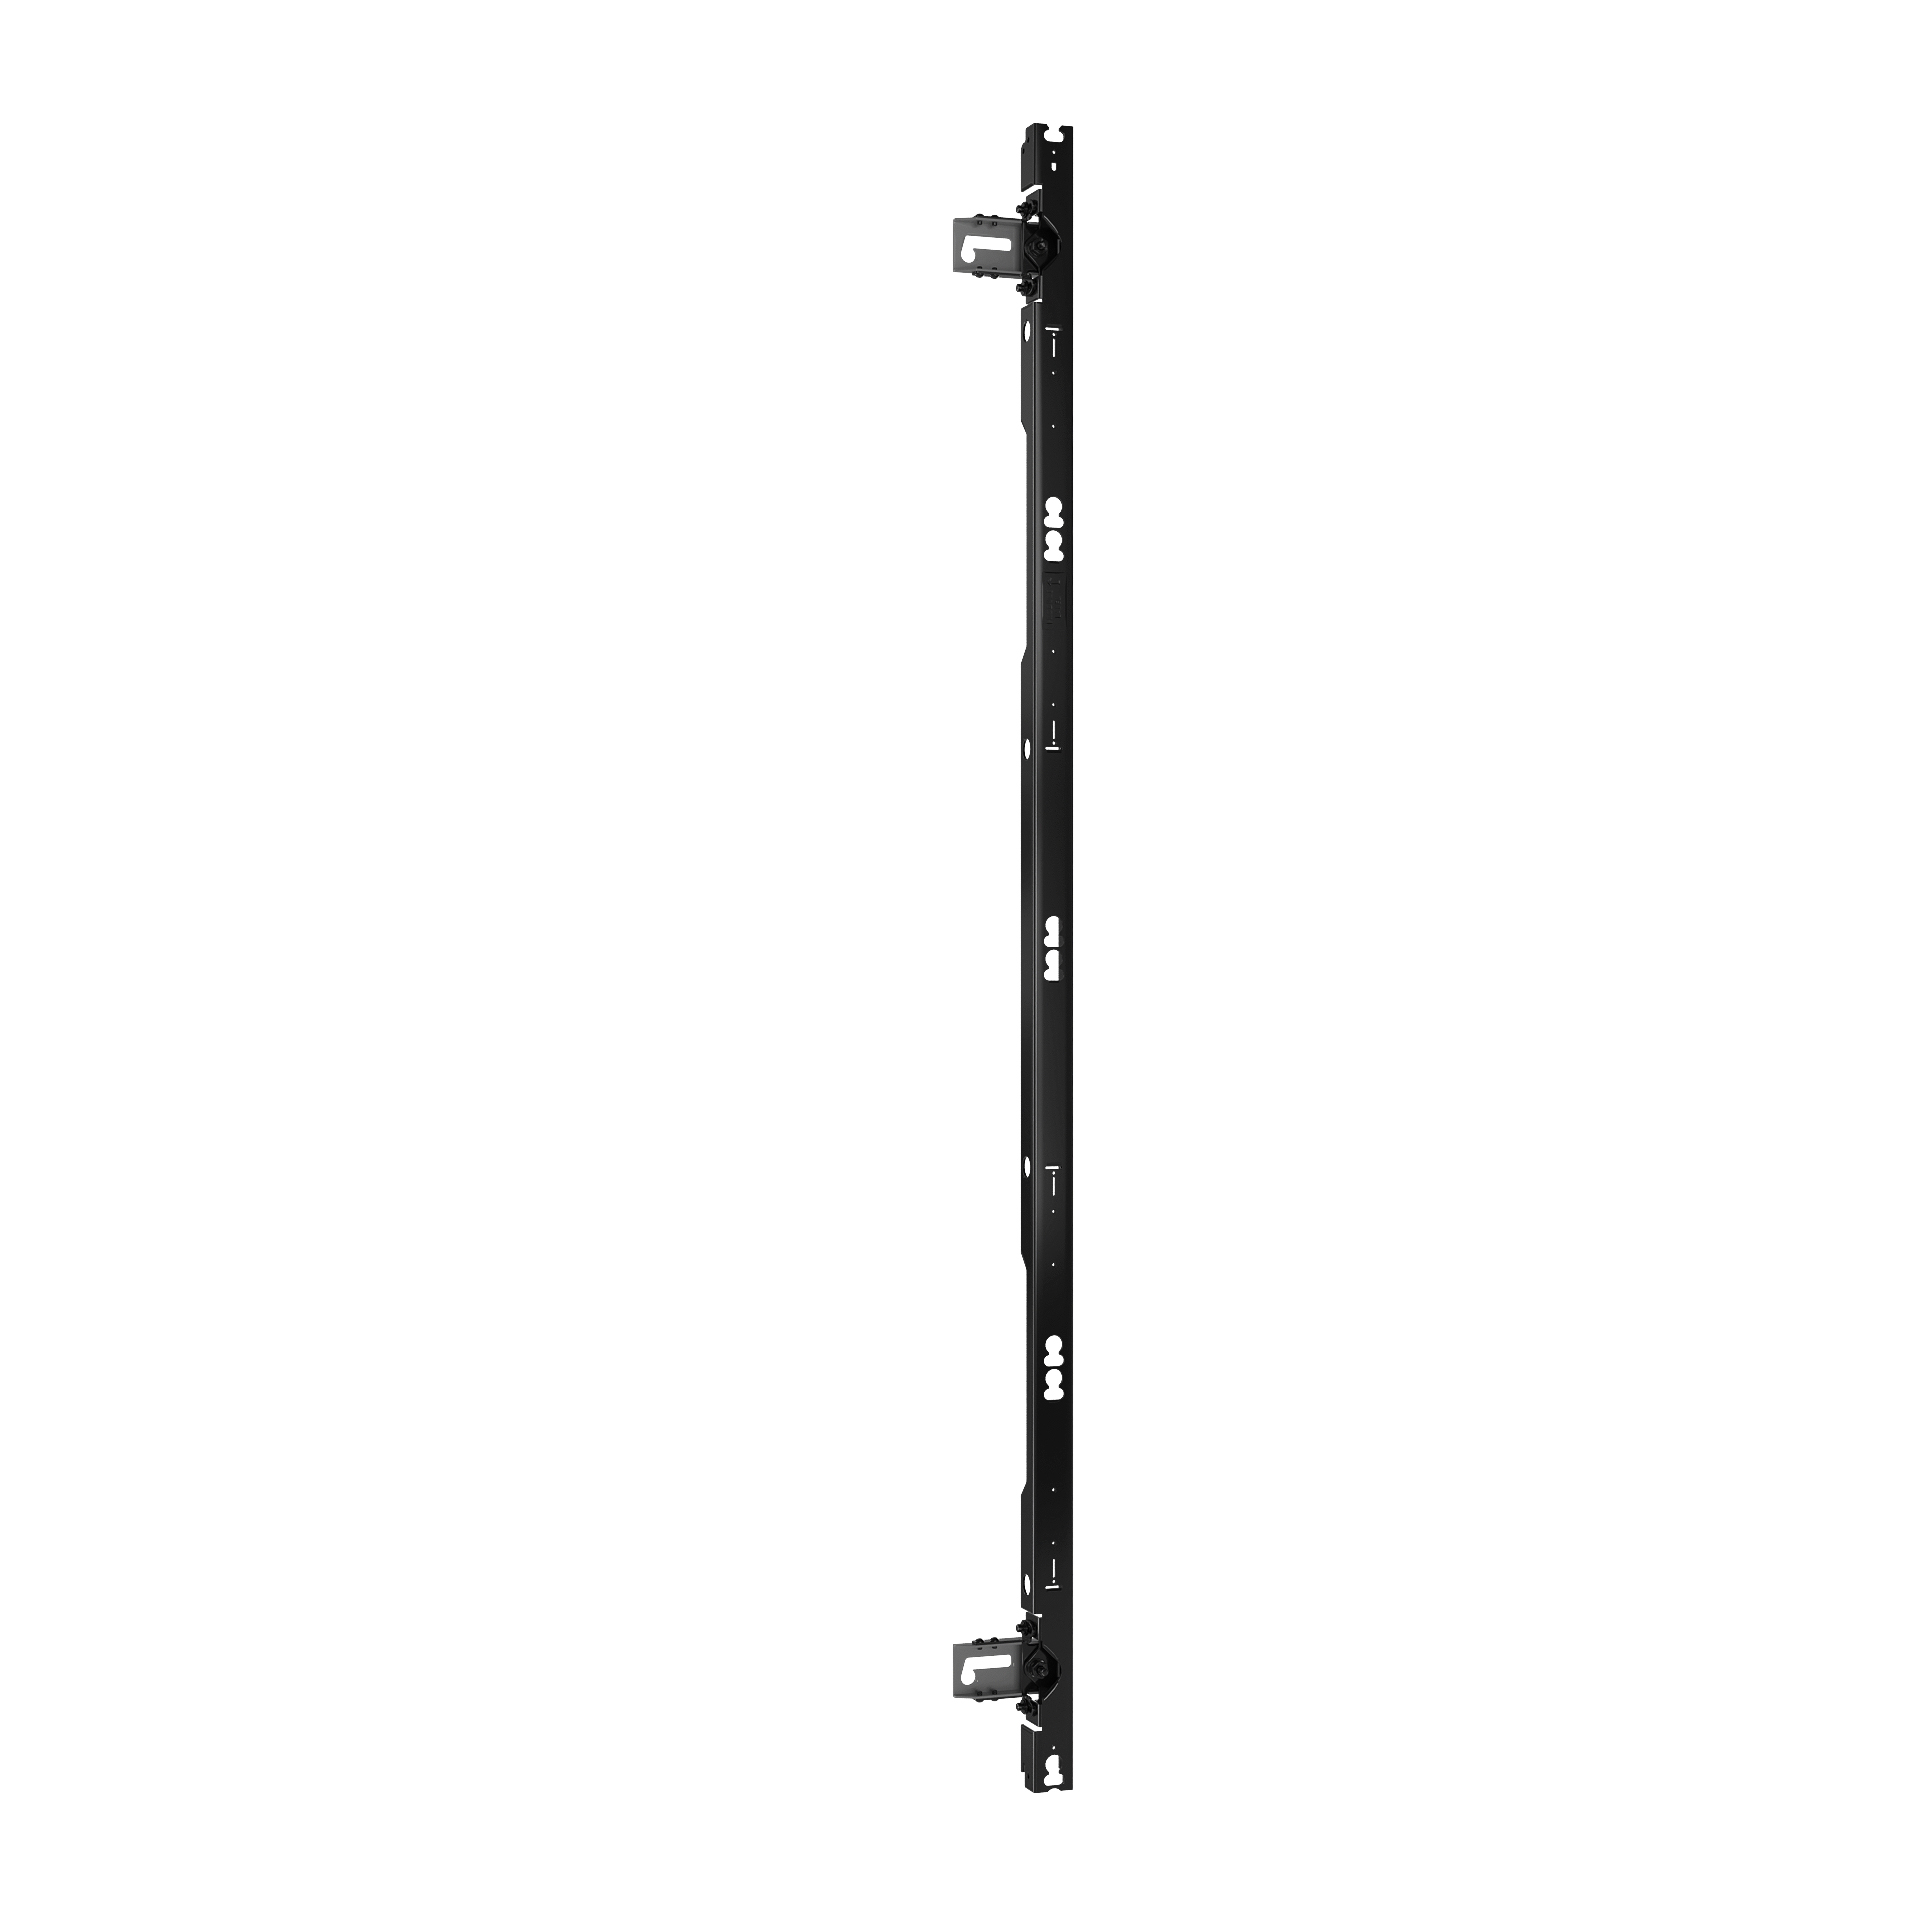 TILD1X4SO1-R Right dvLED Wall Mount for Sony Crystal LED C and B-Series, 4 Displays Tall